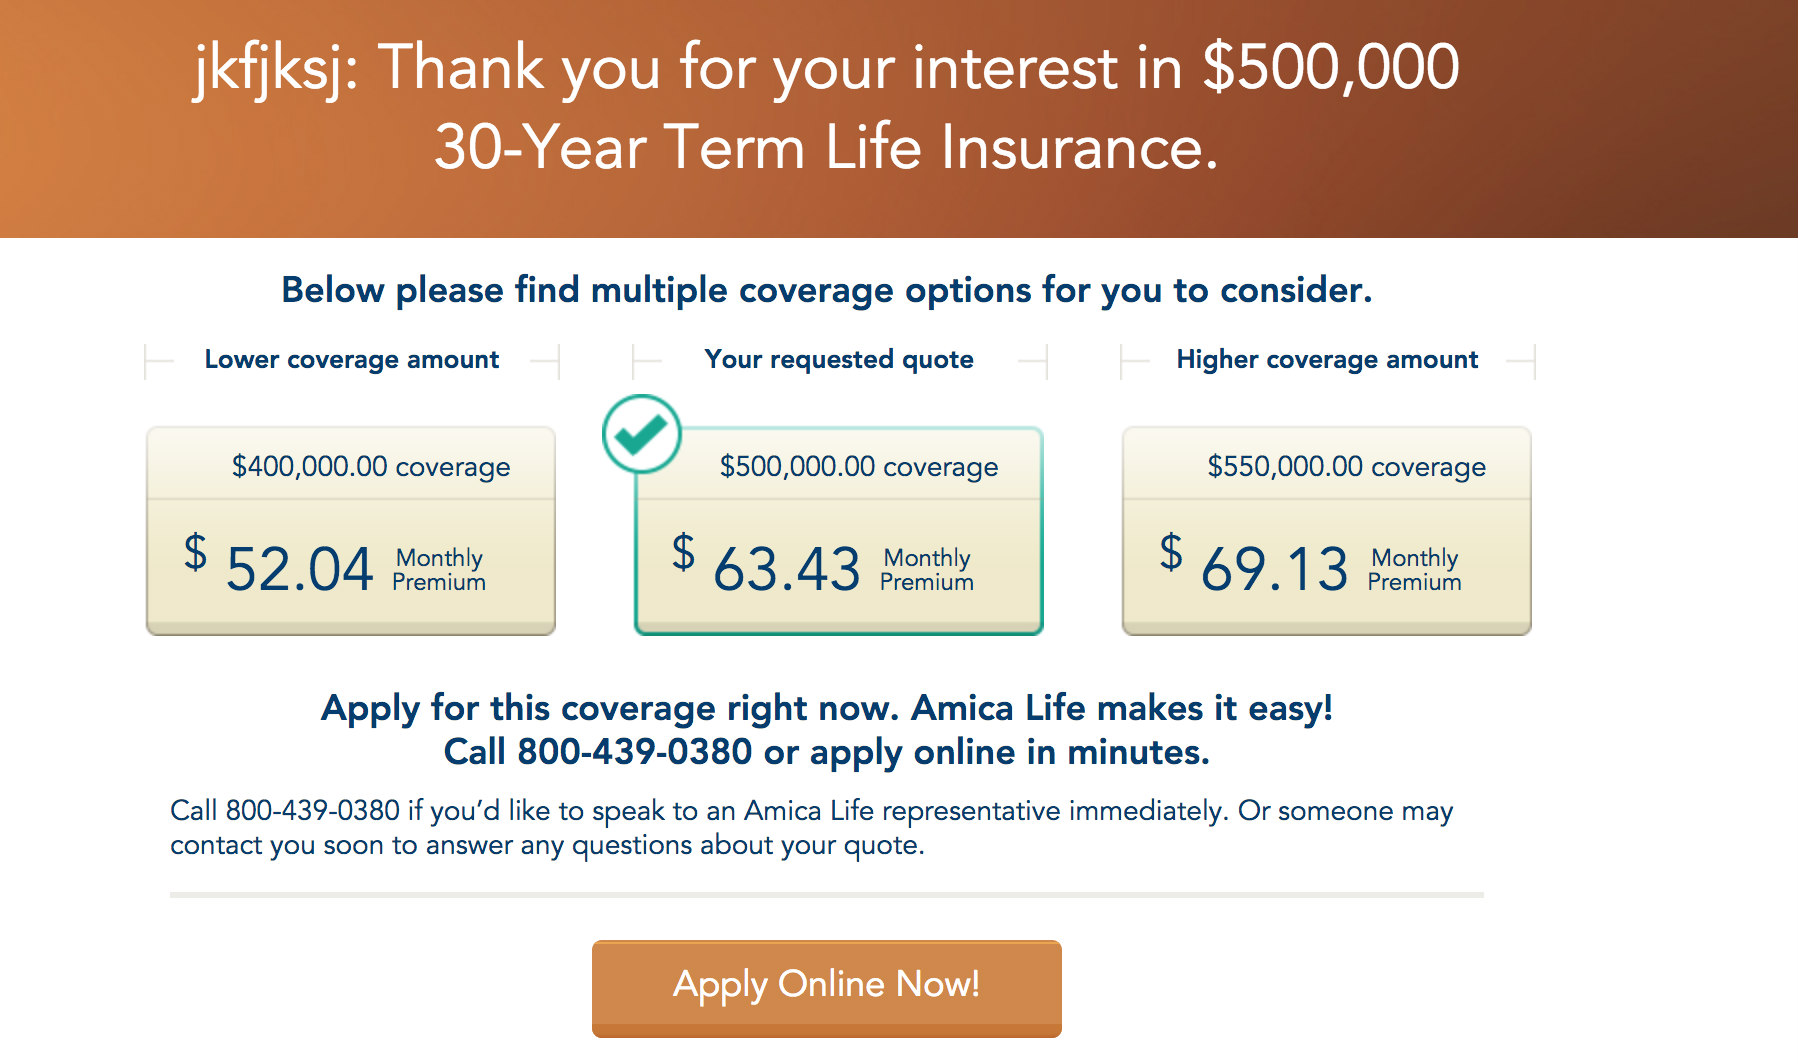 Amica Insurance Review: Are Their Products too Good to be True?